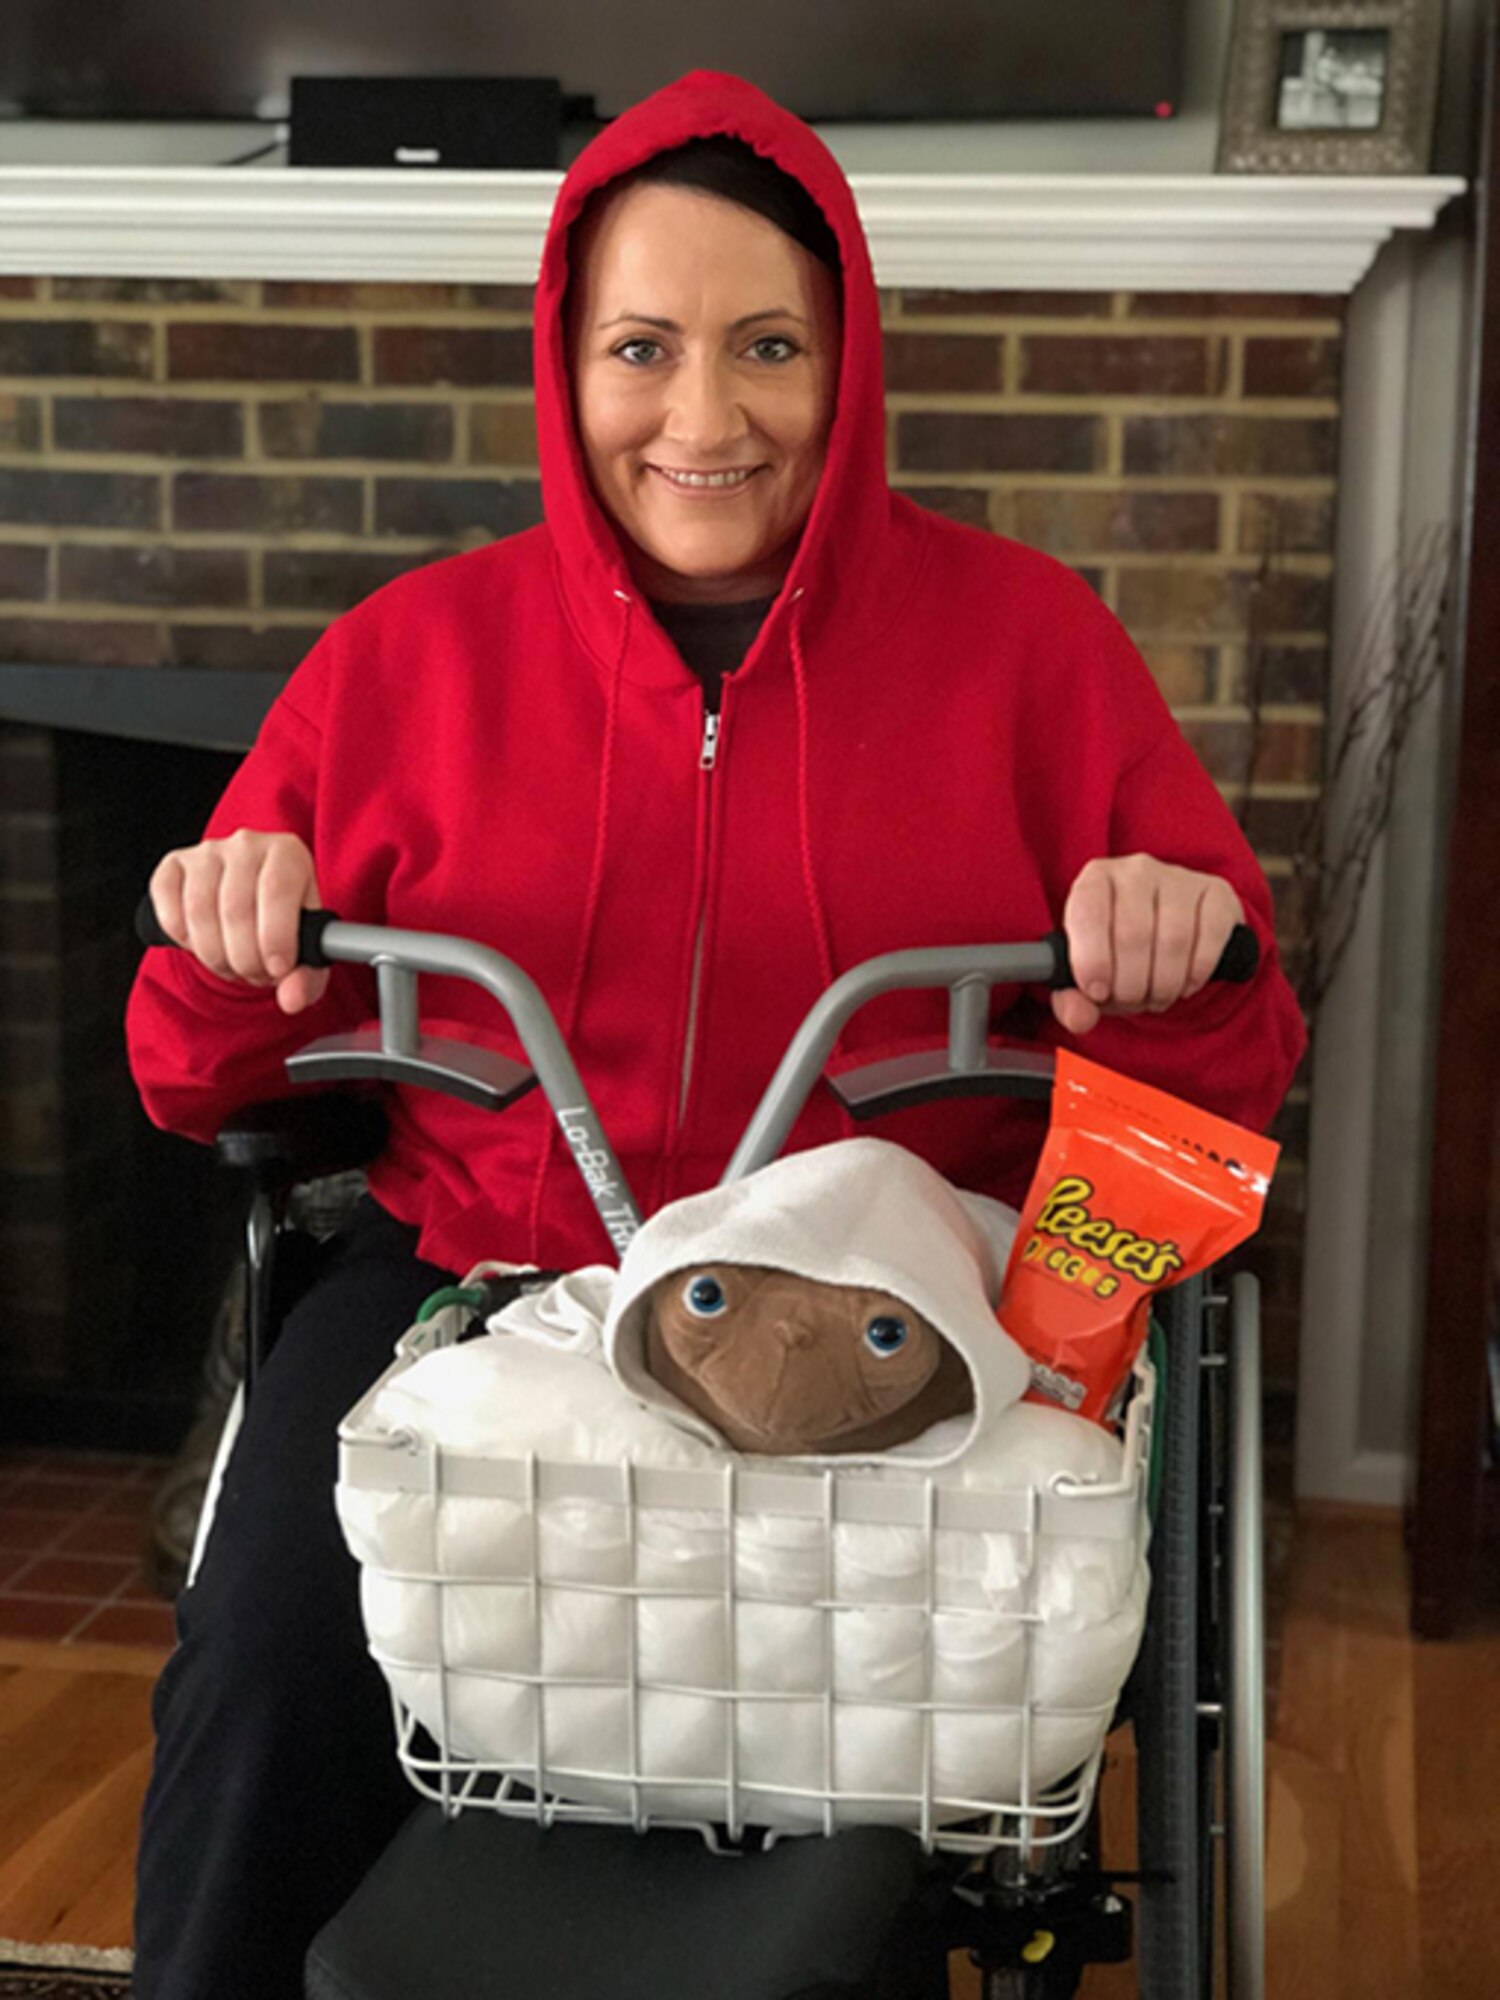 For Halloween, Maj. Stephanie Proellochs dresses up as the familiar characters from the movie, “E.T.” Proellochs often uses humor as she embraces her new life with a prosthesis. (Courtesy Photo)